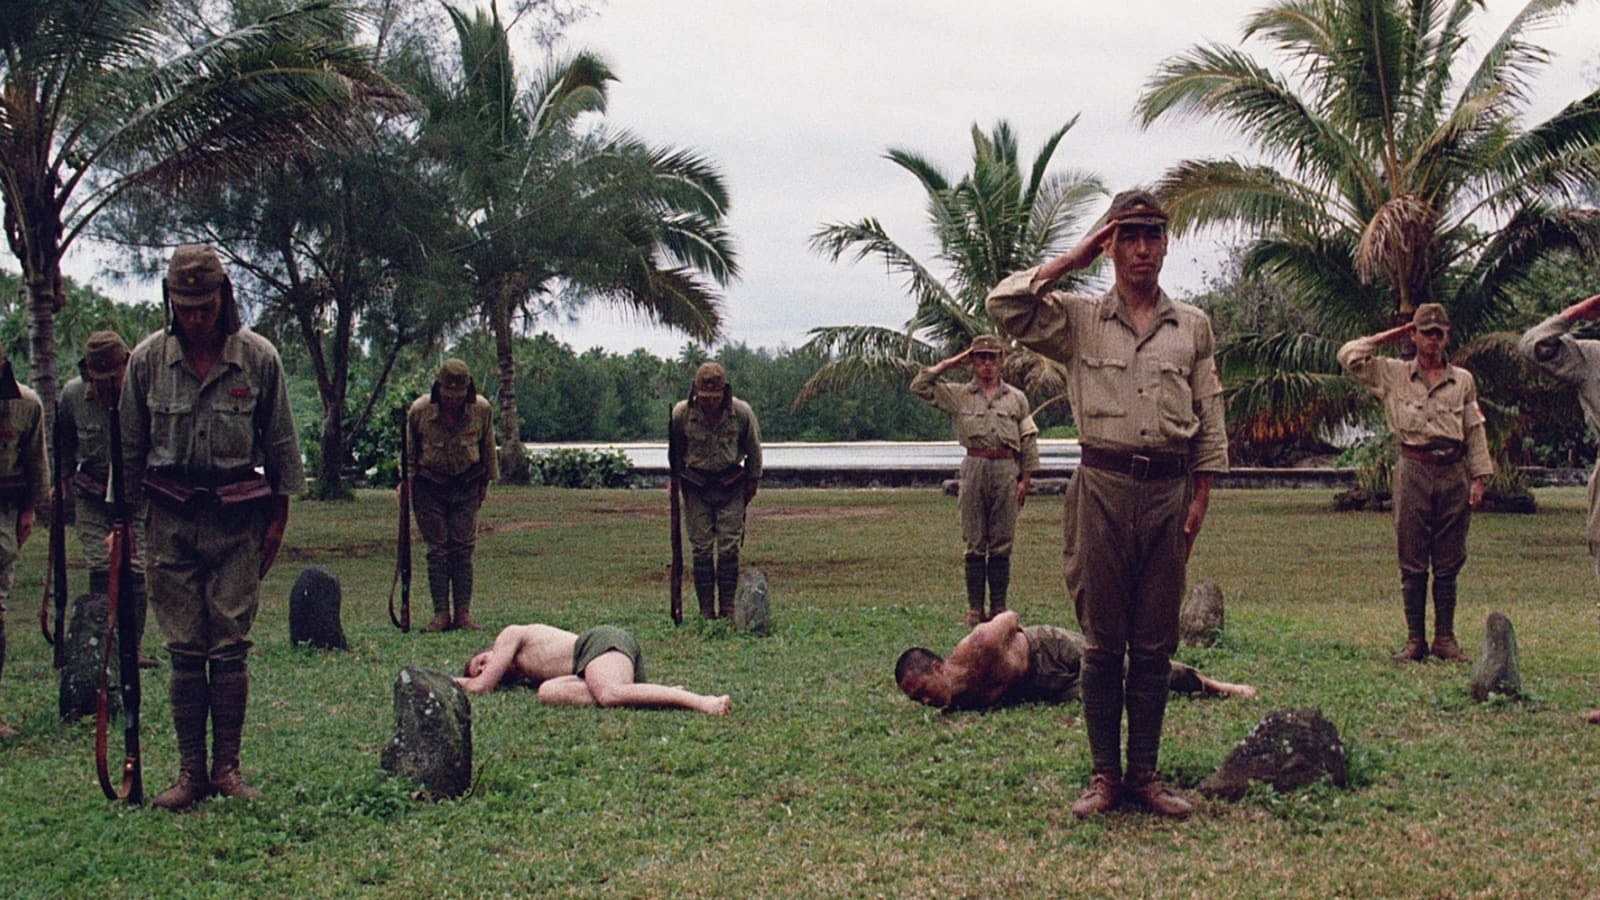 military men salute facing the camera standing amidst palm trees and two bodies writhing on the ground